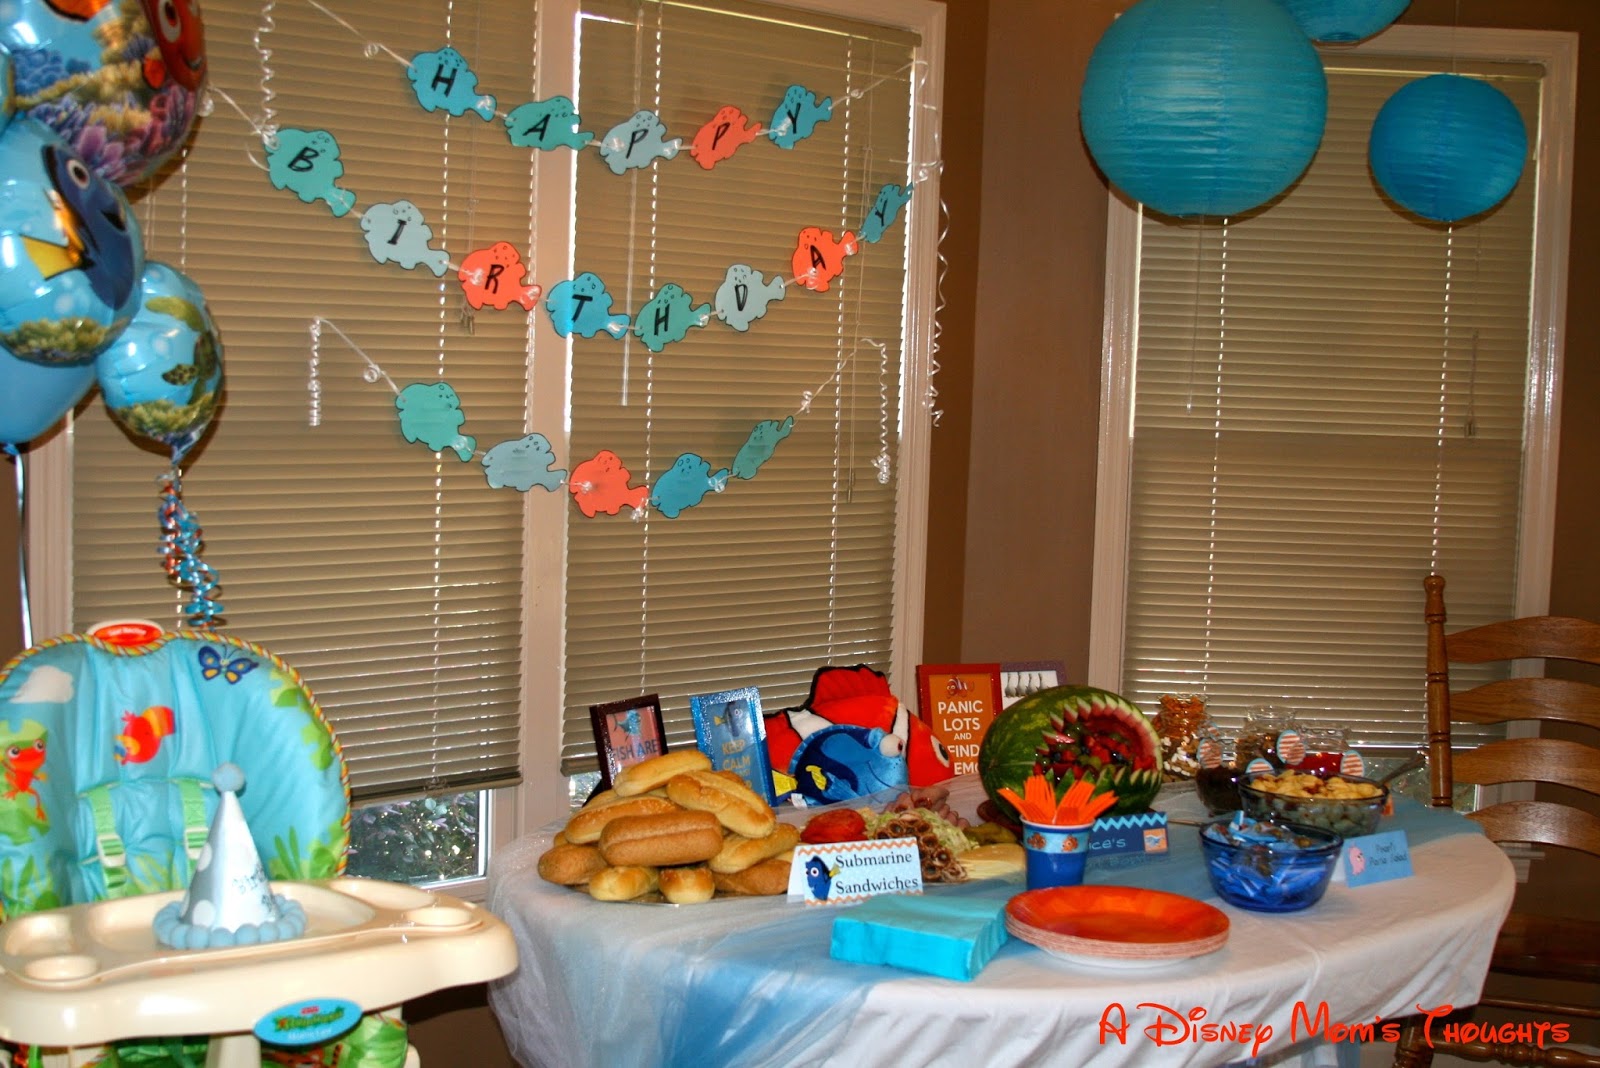  Finding  Nemo  First Birthday  Decorations  A Disney Mom s 